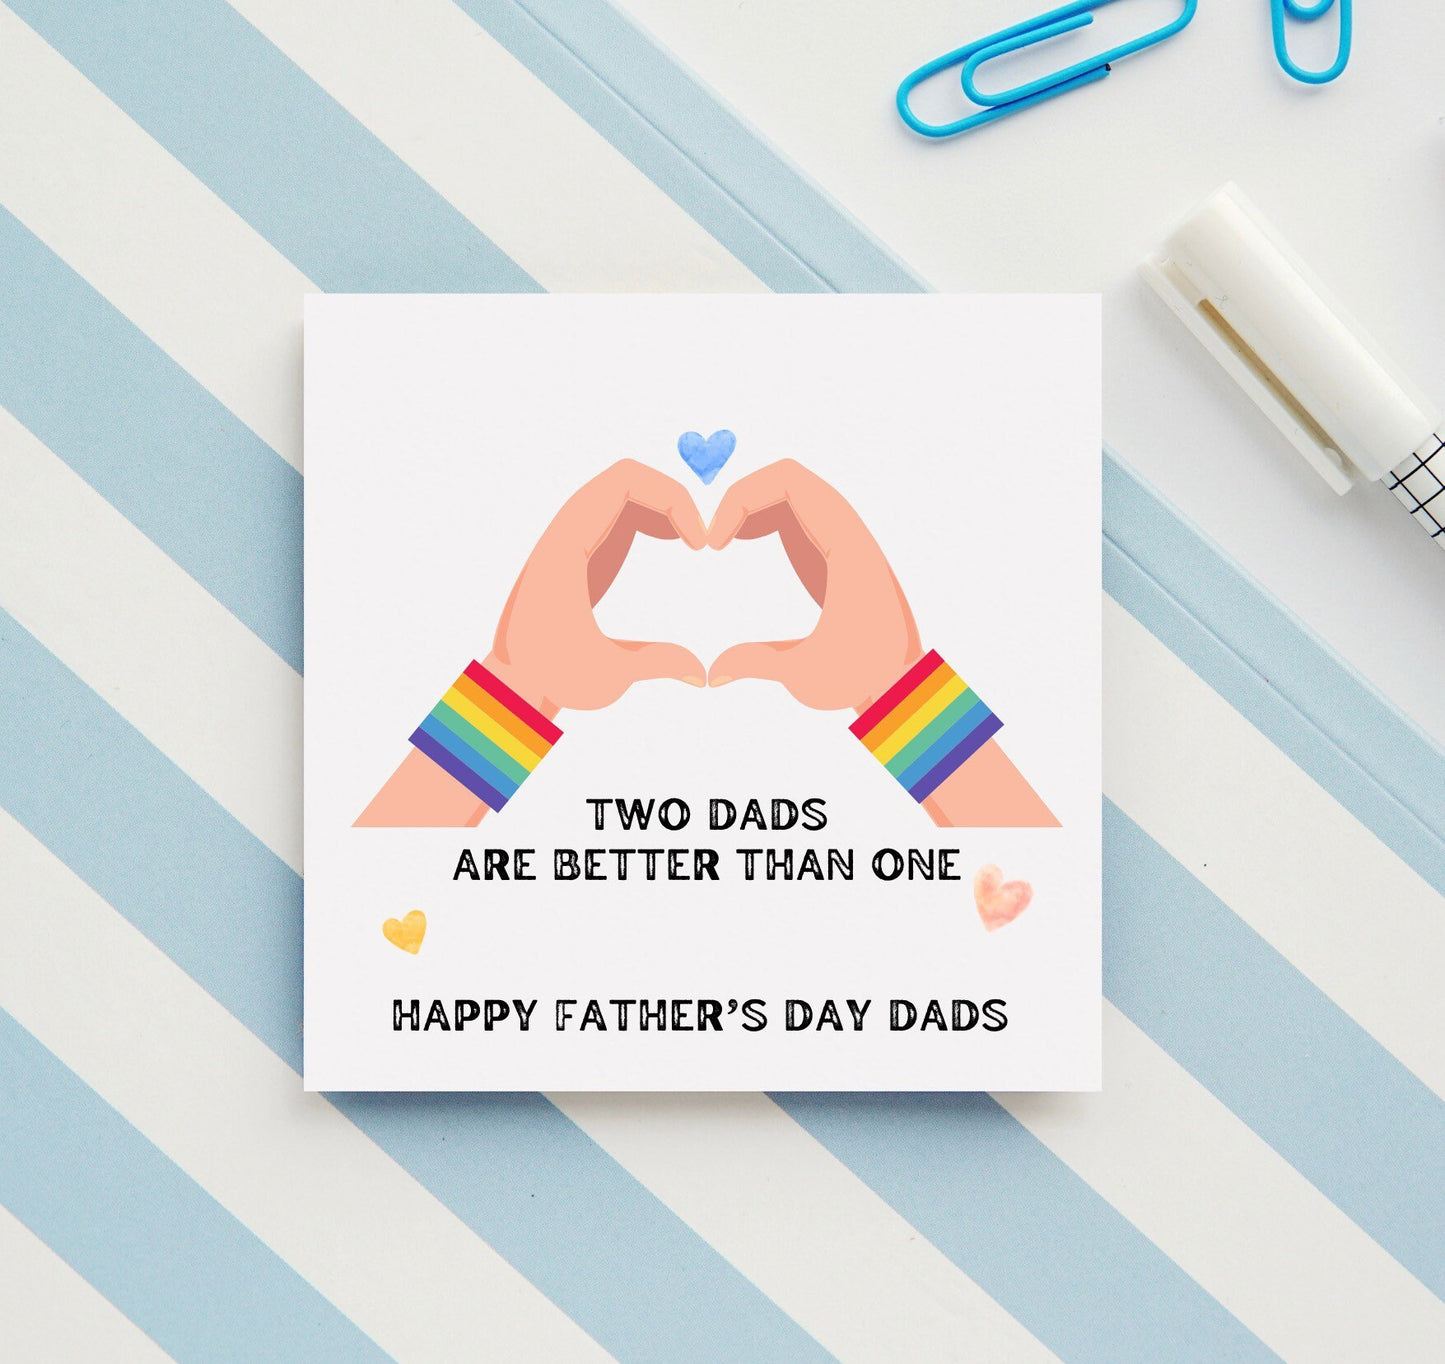 Two dads Father’s Day card, two dads are better than one, gay pride same sex parenting, LGBTQ cards